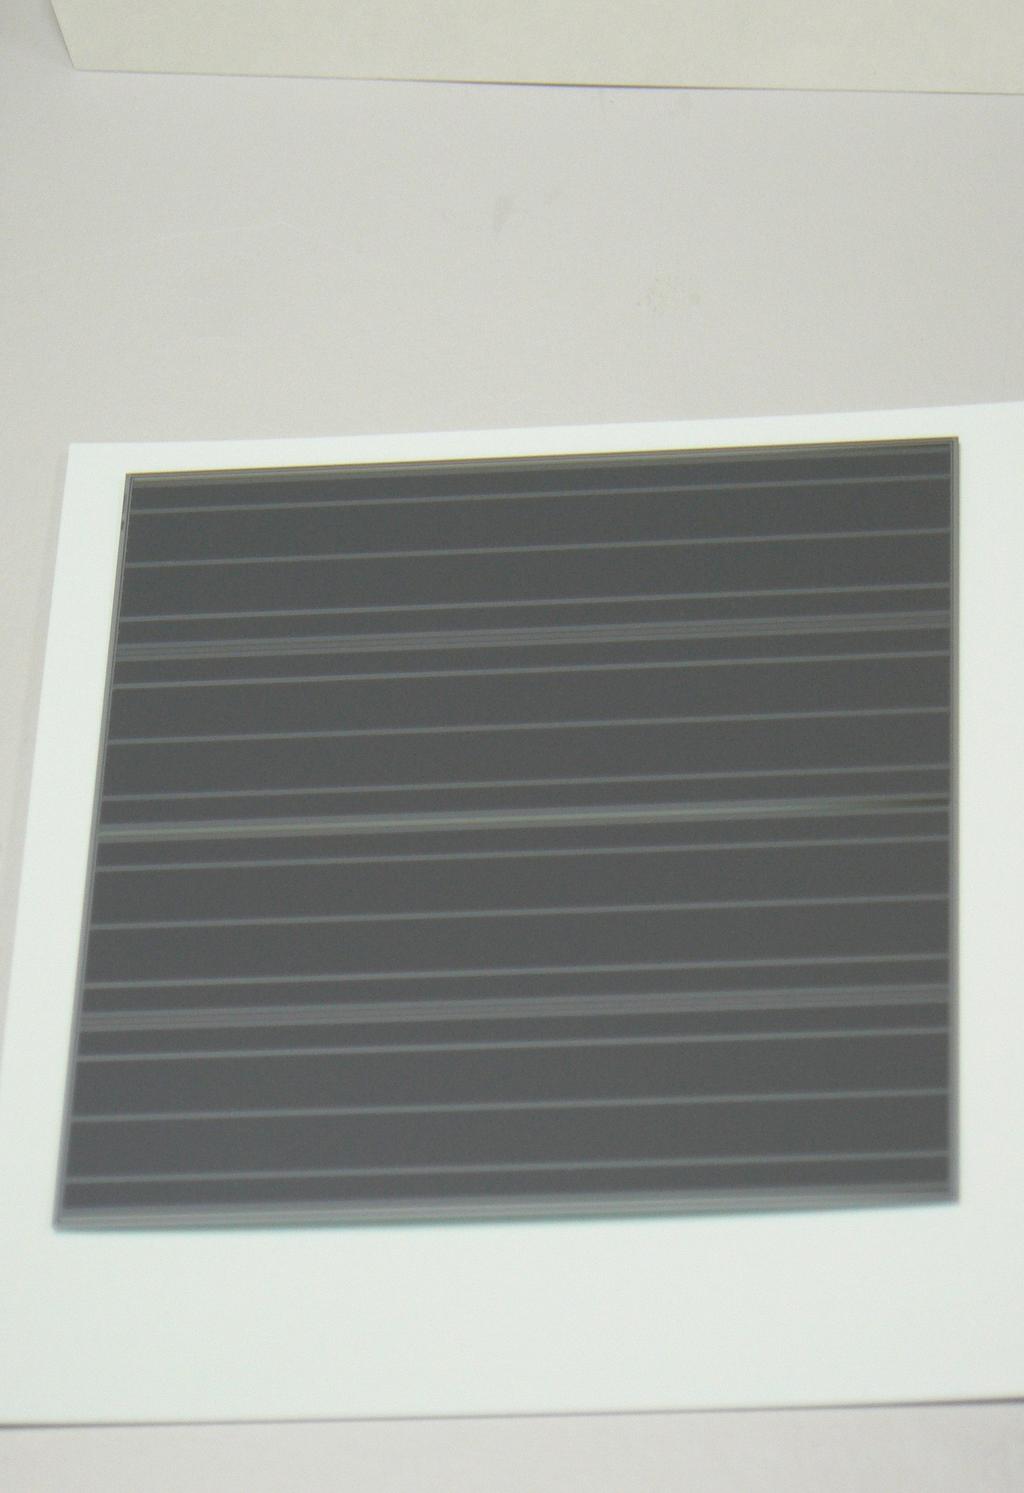 HPK n-in-p Sensor Mask Layout Strip segments 4 rows of 2.4 cm strips (each row 1280 channels) Dimension Full square Wafer 150 mm p-type FZ(100) 138 mm dia.